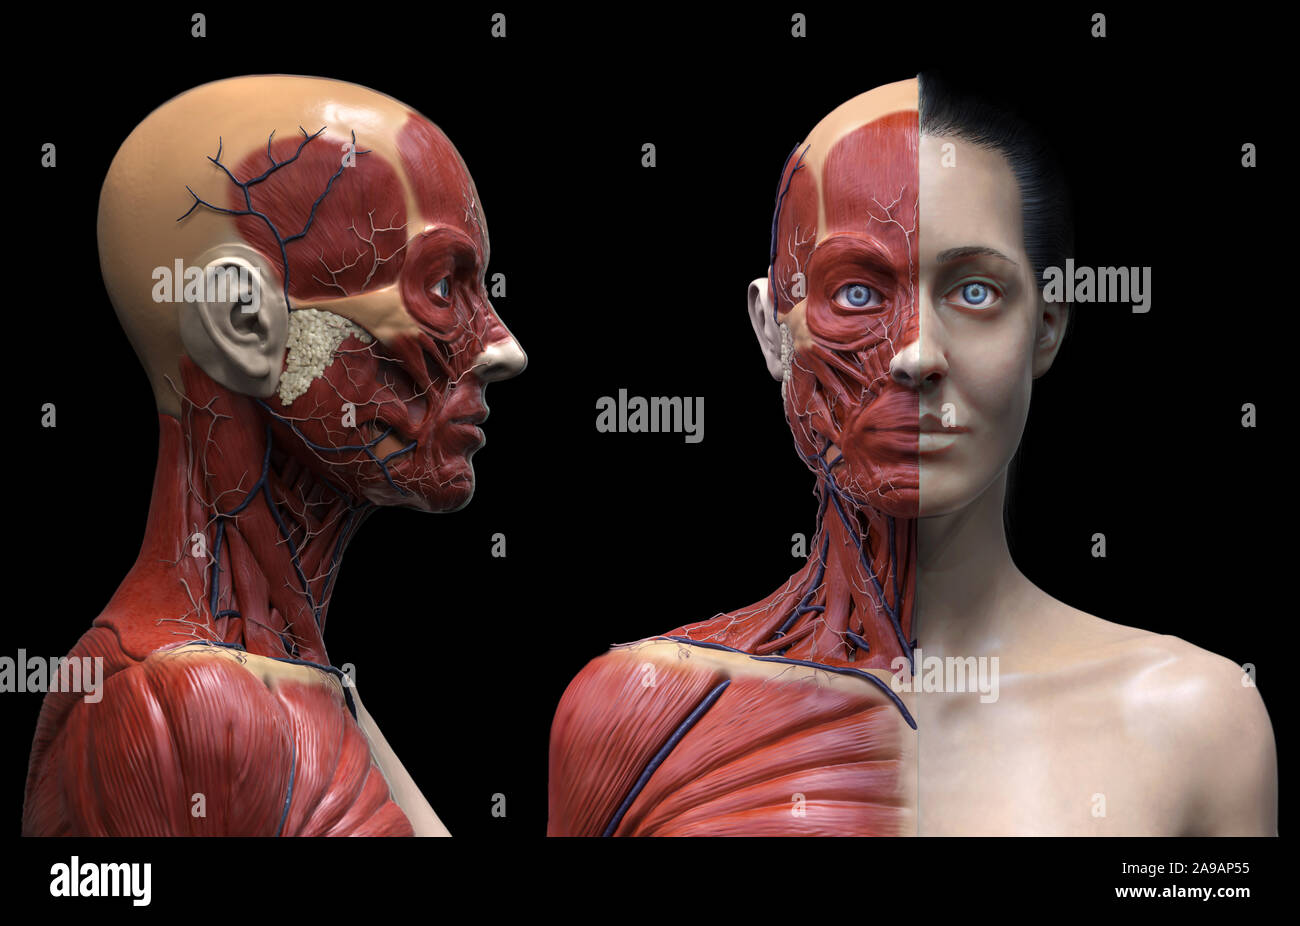 Human body anatomy of a woman muscles structure of a female, front view side view and perspective view, 3d render Stock Photo